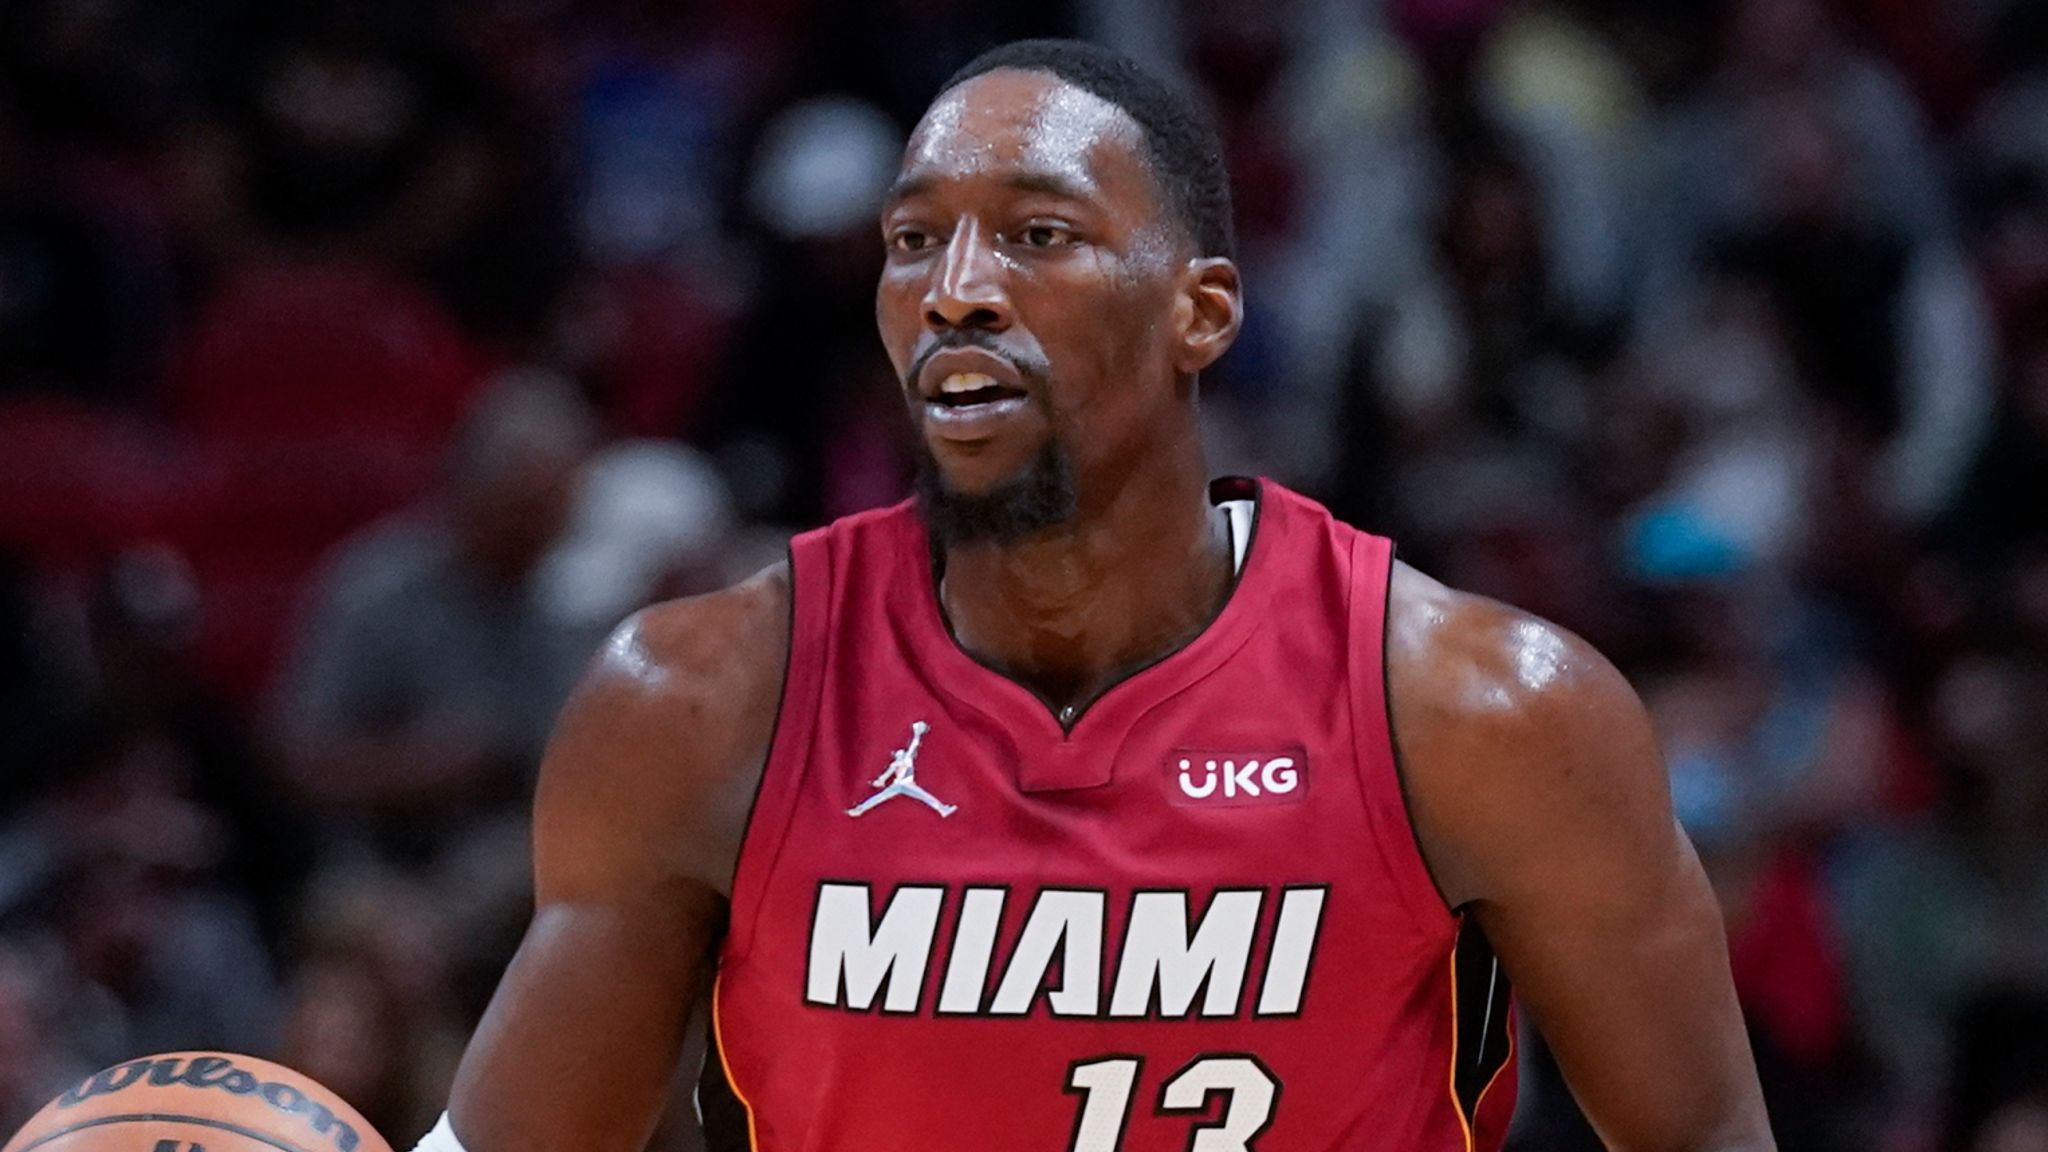  Bam Adebayo: The Unstoppable Force Behind Miami Heat's Defensive Mastery